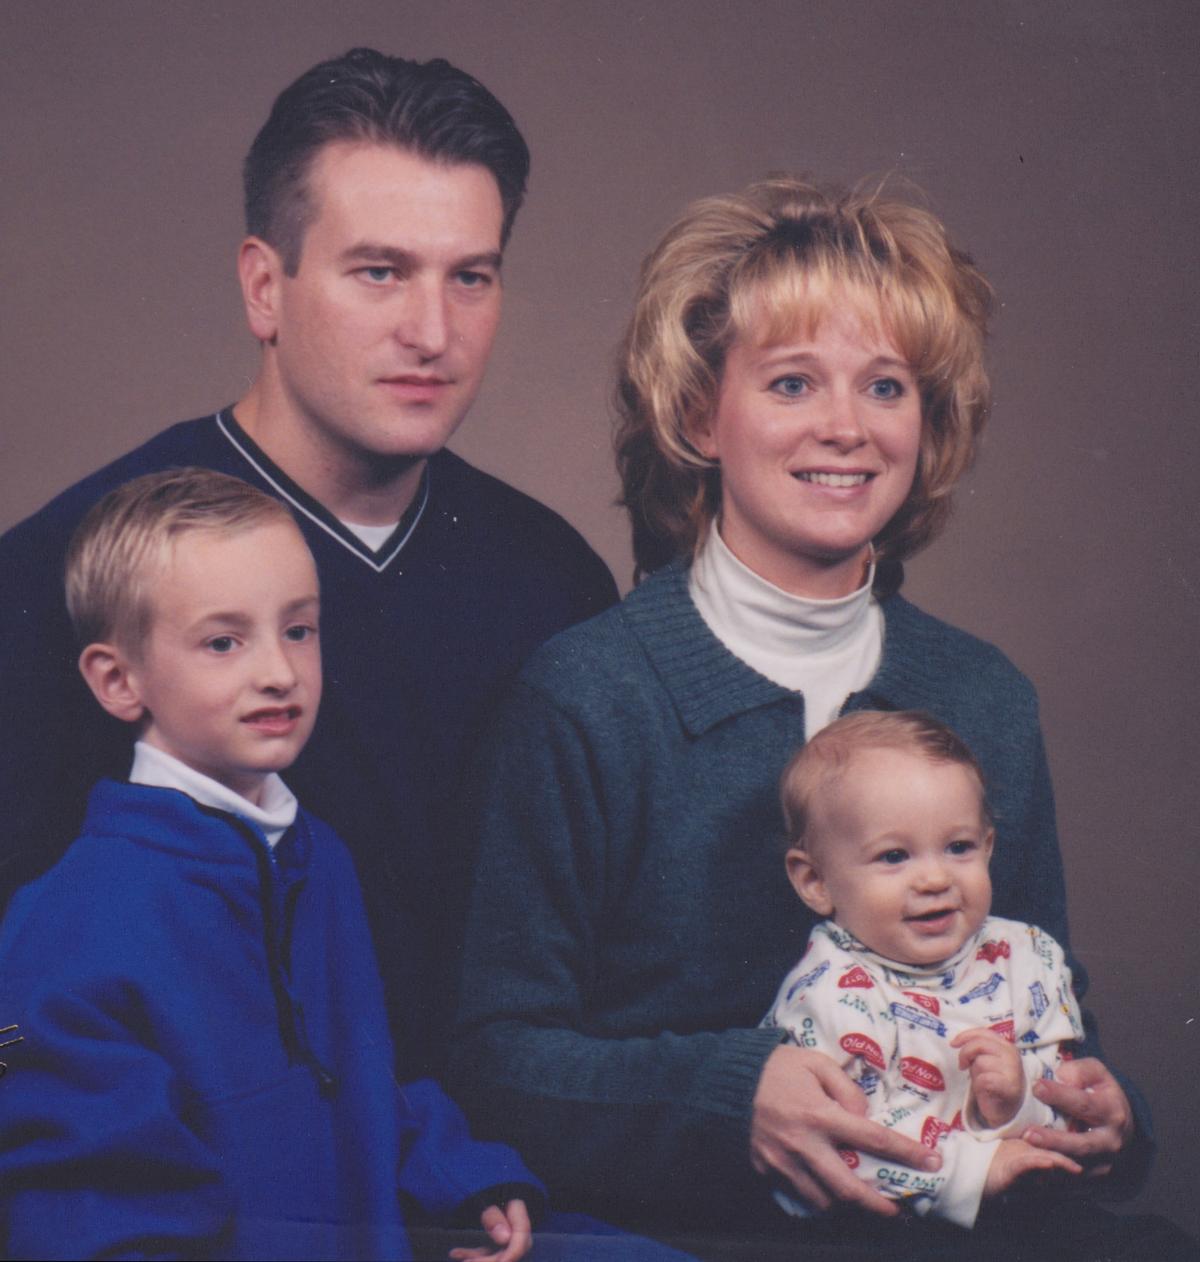  Jeffery C. Olsen with Tamara and his two sons. Tamara and baby Griffin passed away in the car crash in 1997. (Courtesy of <a href="https://www.envoypublishing.com/">Jeffery C. Olsen</a>)